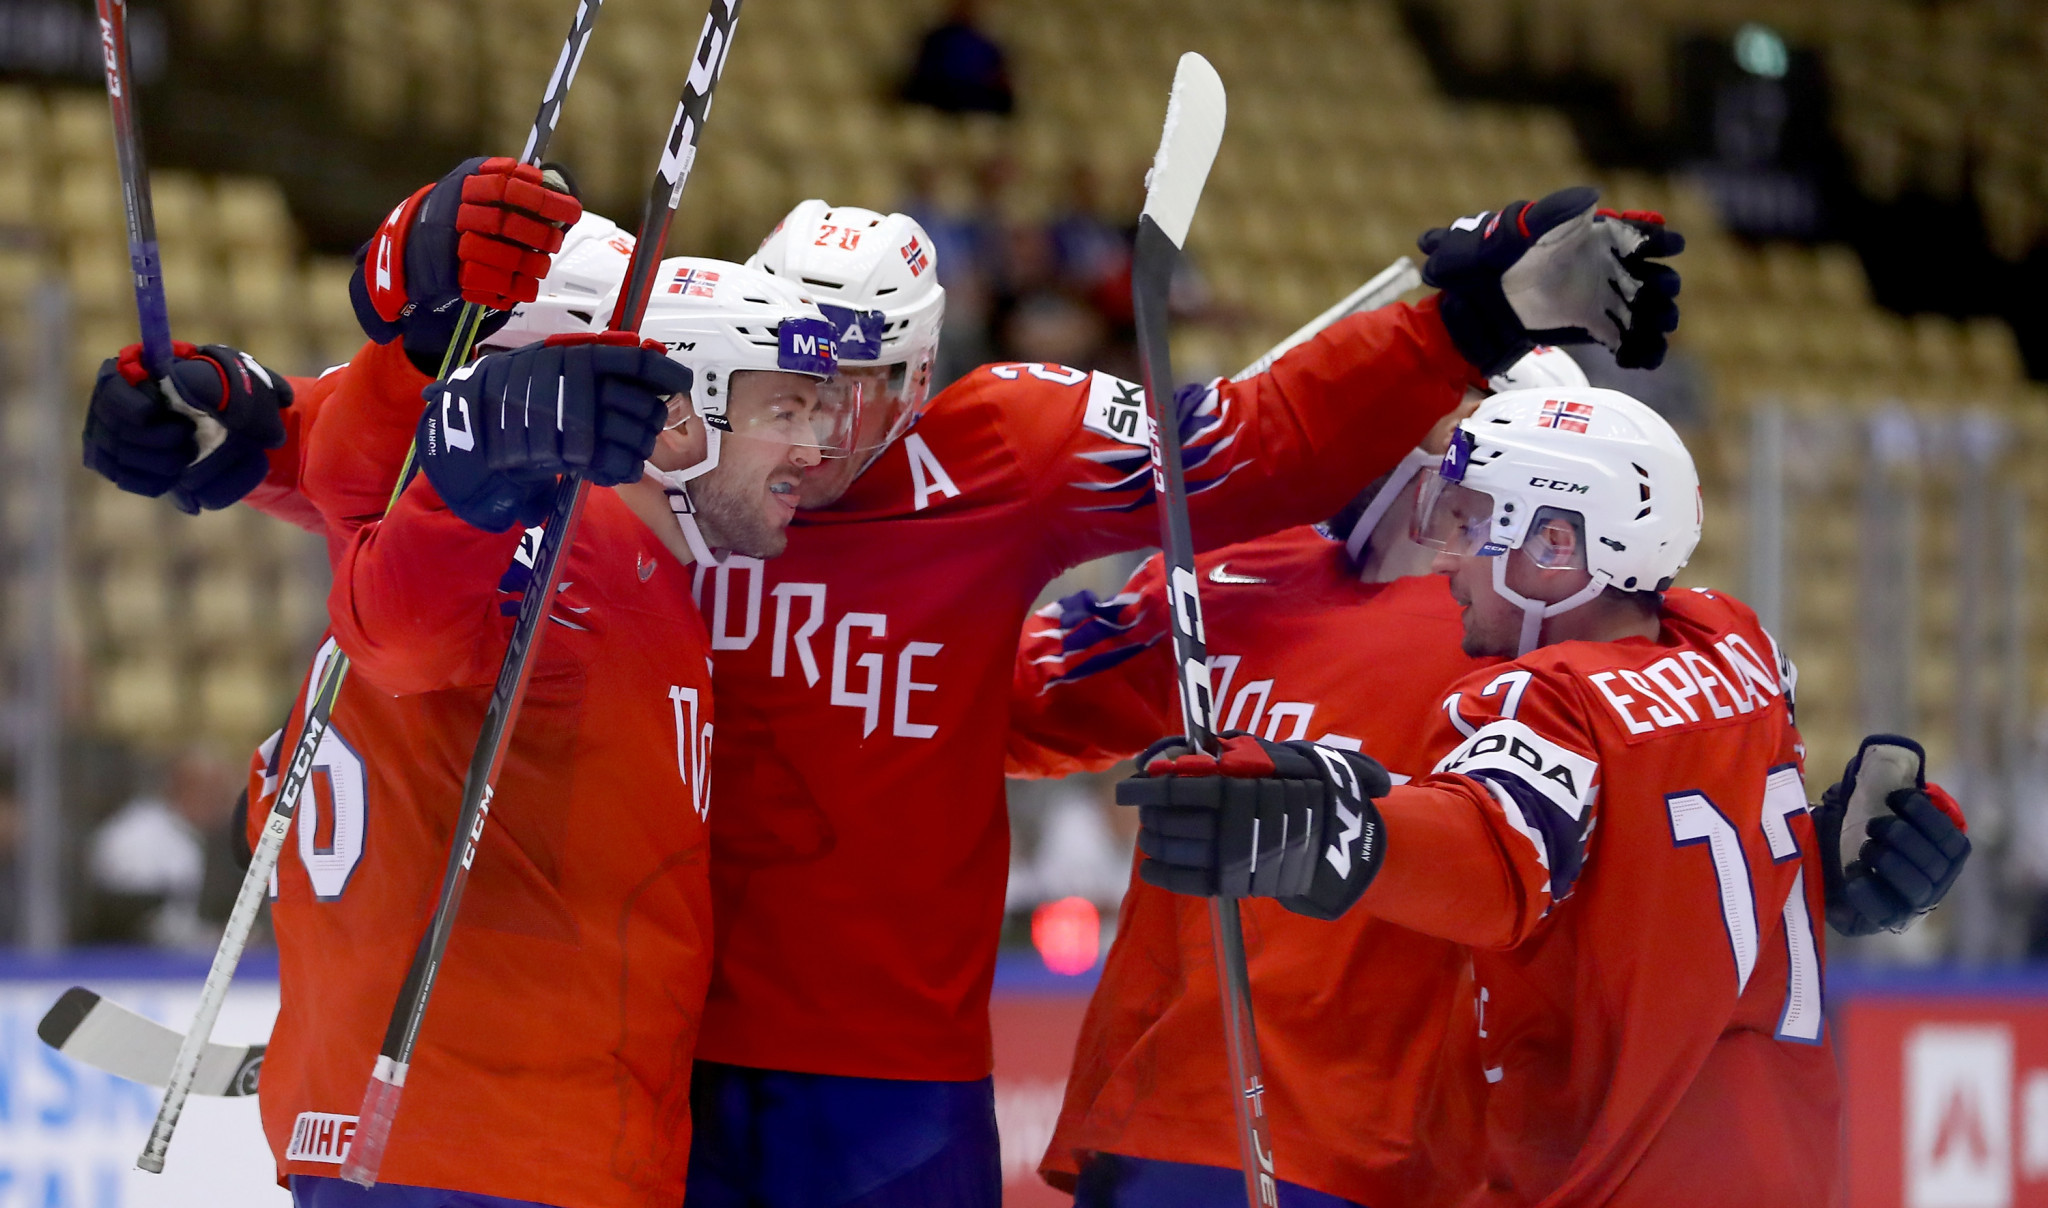 Tage Pettersen has been placed in charge of Norwegian ice hockey fortunes ©Getty Images